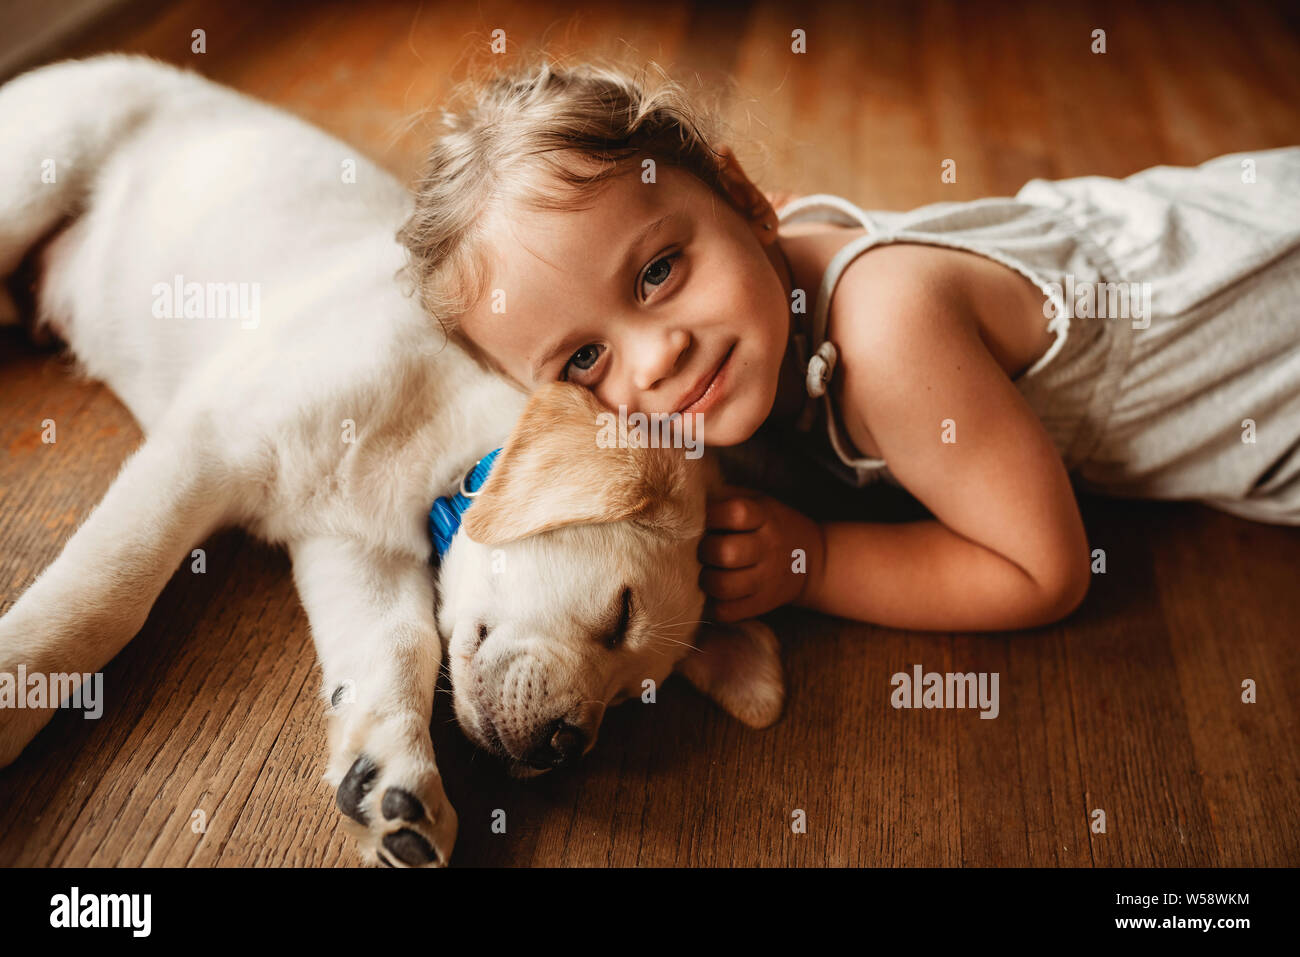 yellow Labrador lab puppy snuggling with little girl Stock Photo